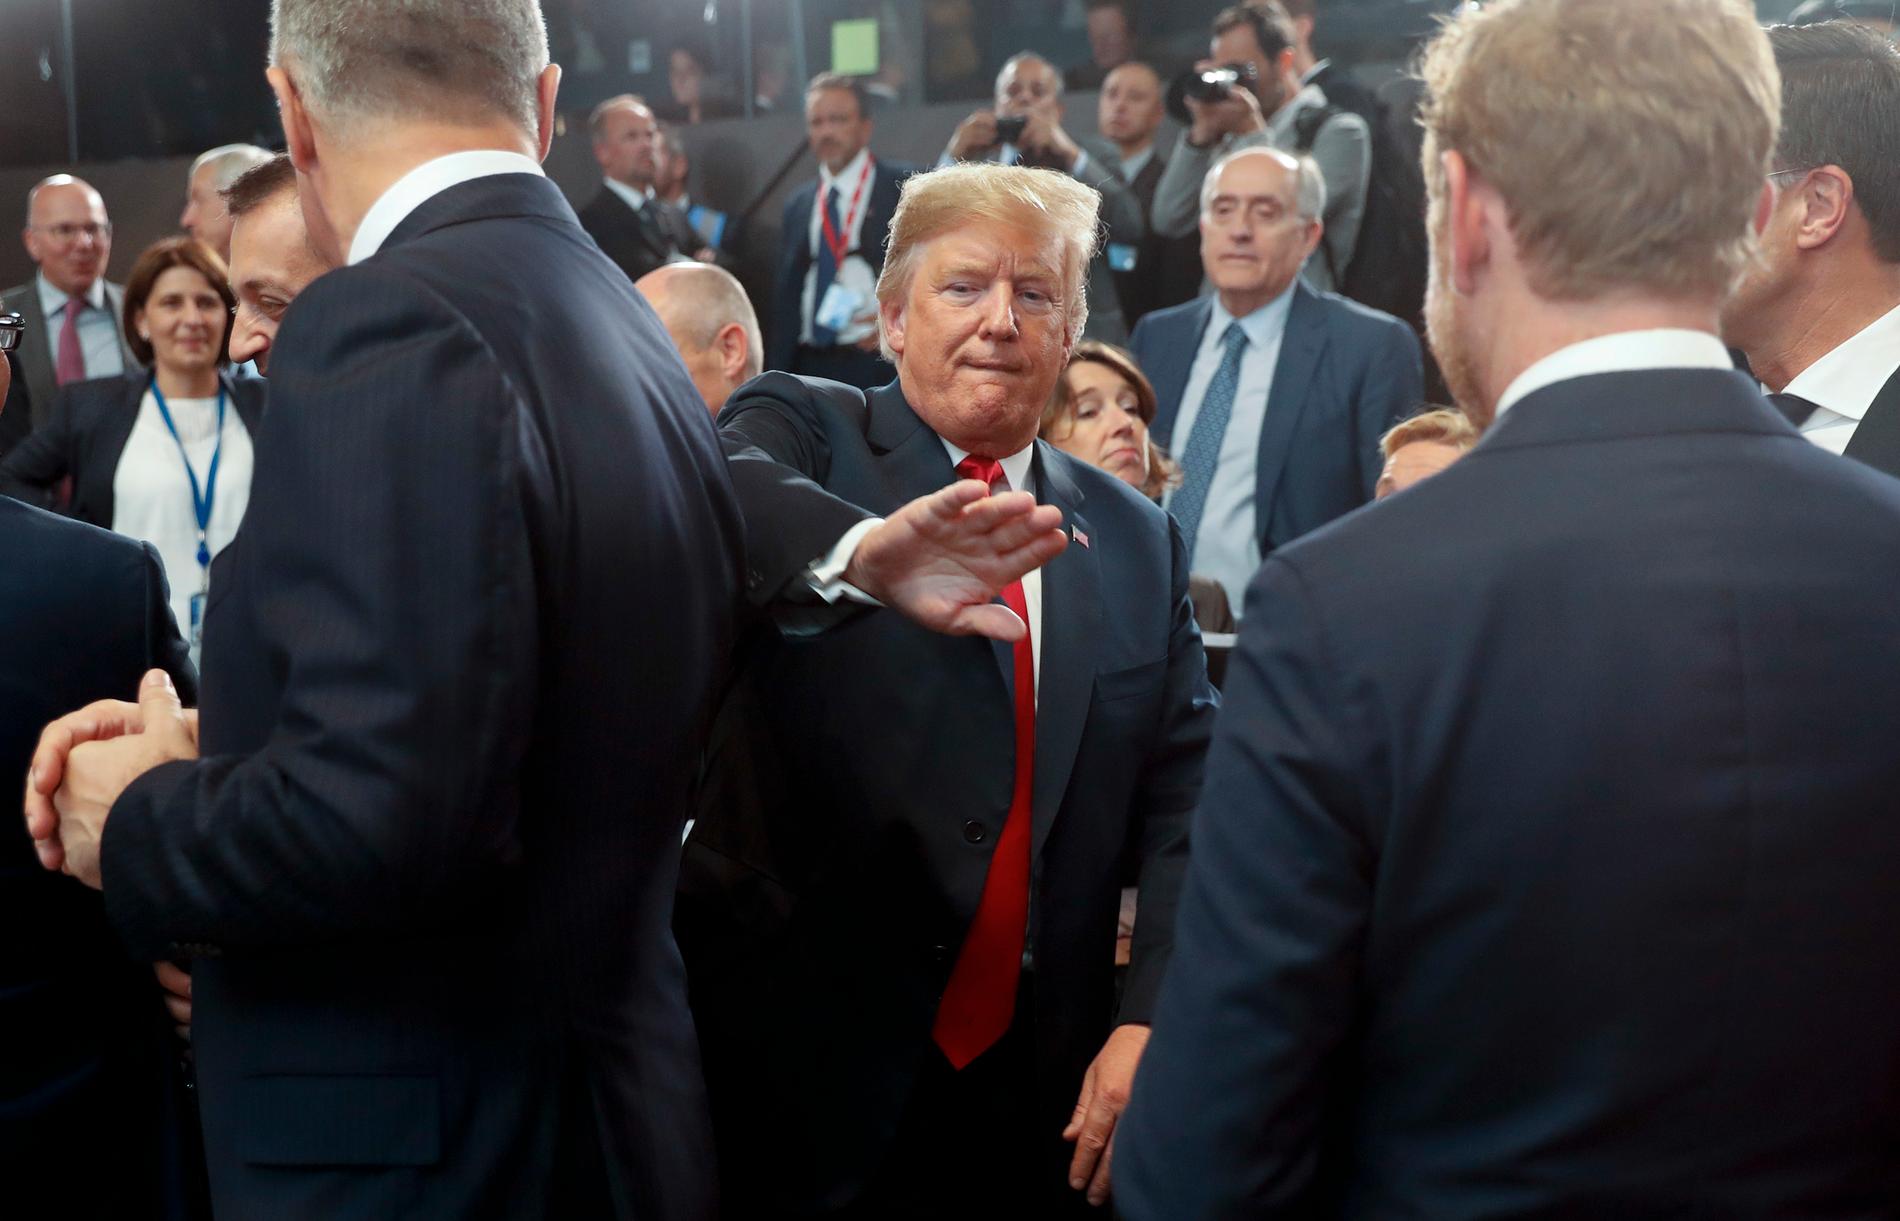 Out of the way: Donald Trump is making his way to a seat at the table at the 2018 NATO summit.